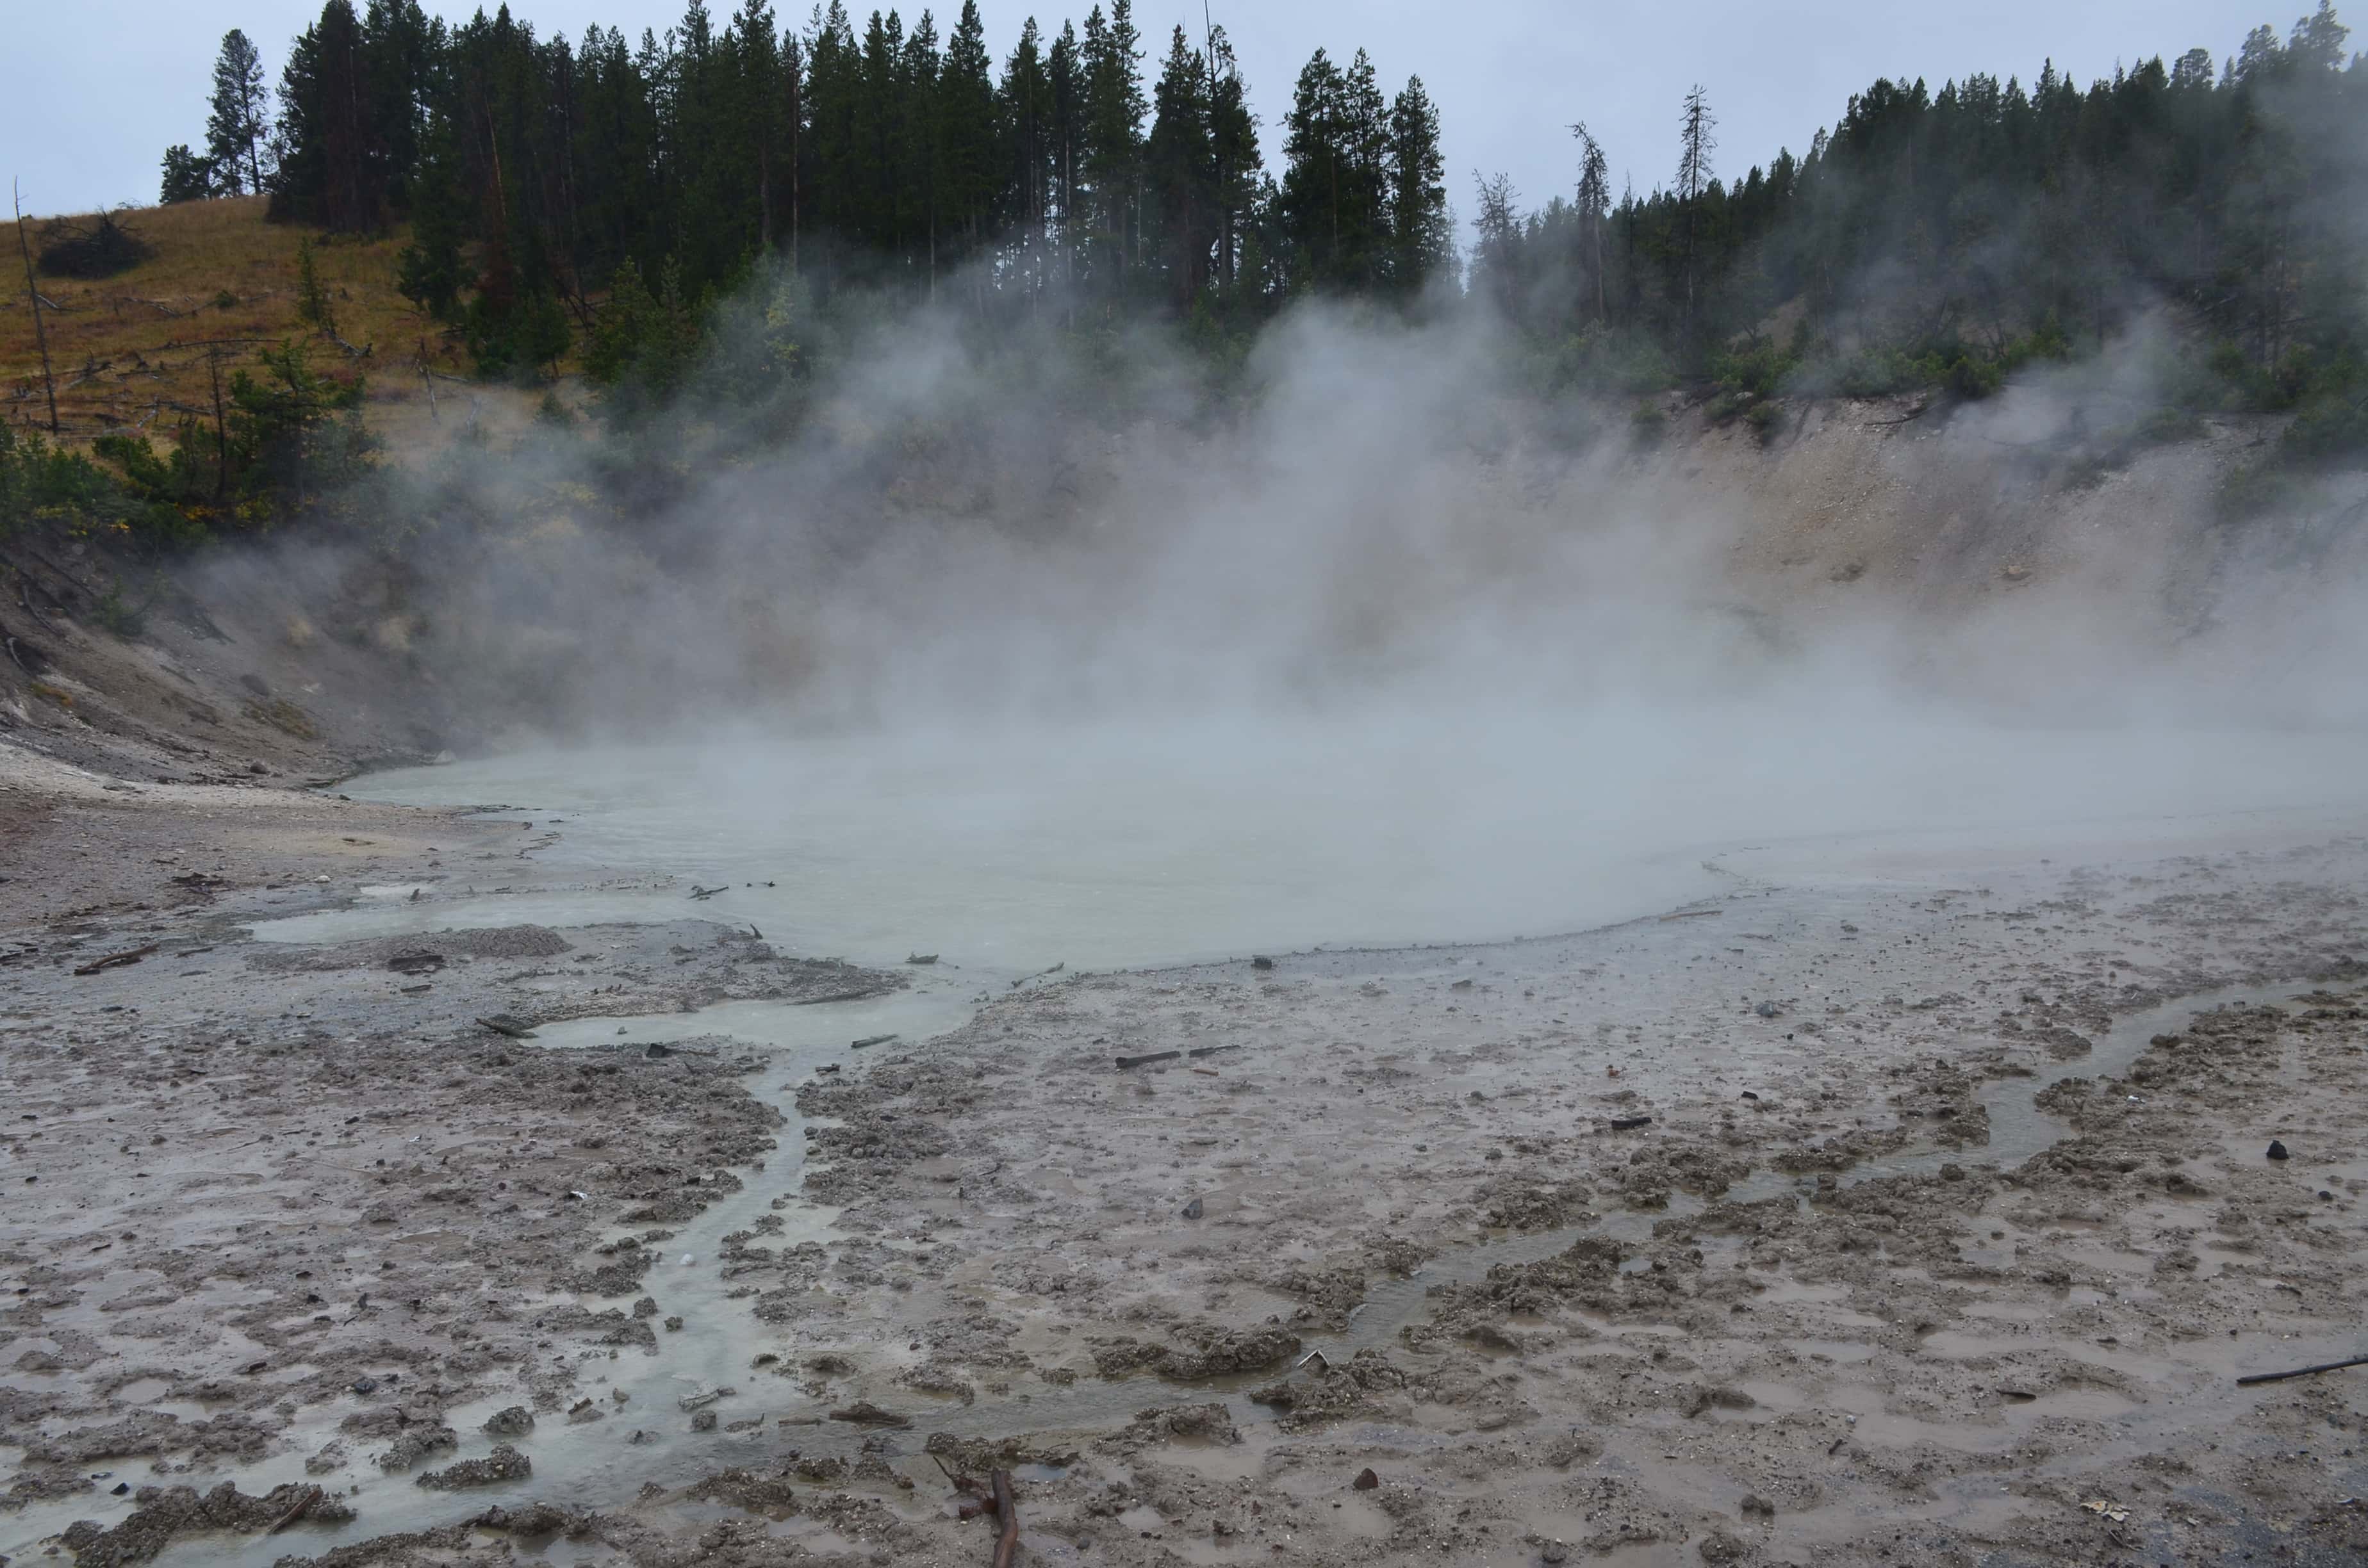 Mud Caldron at Mud Volcano Area in Yellowstone National Park, Wyoming